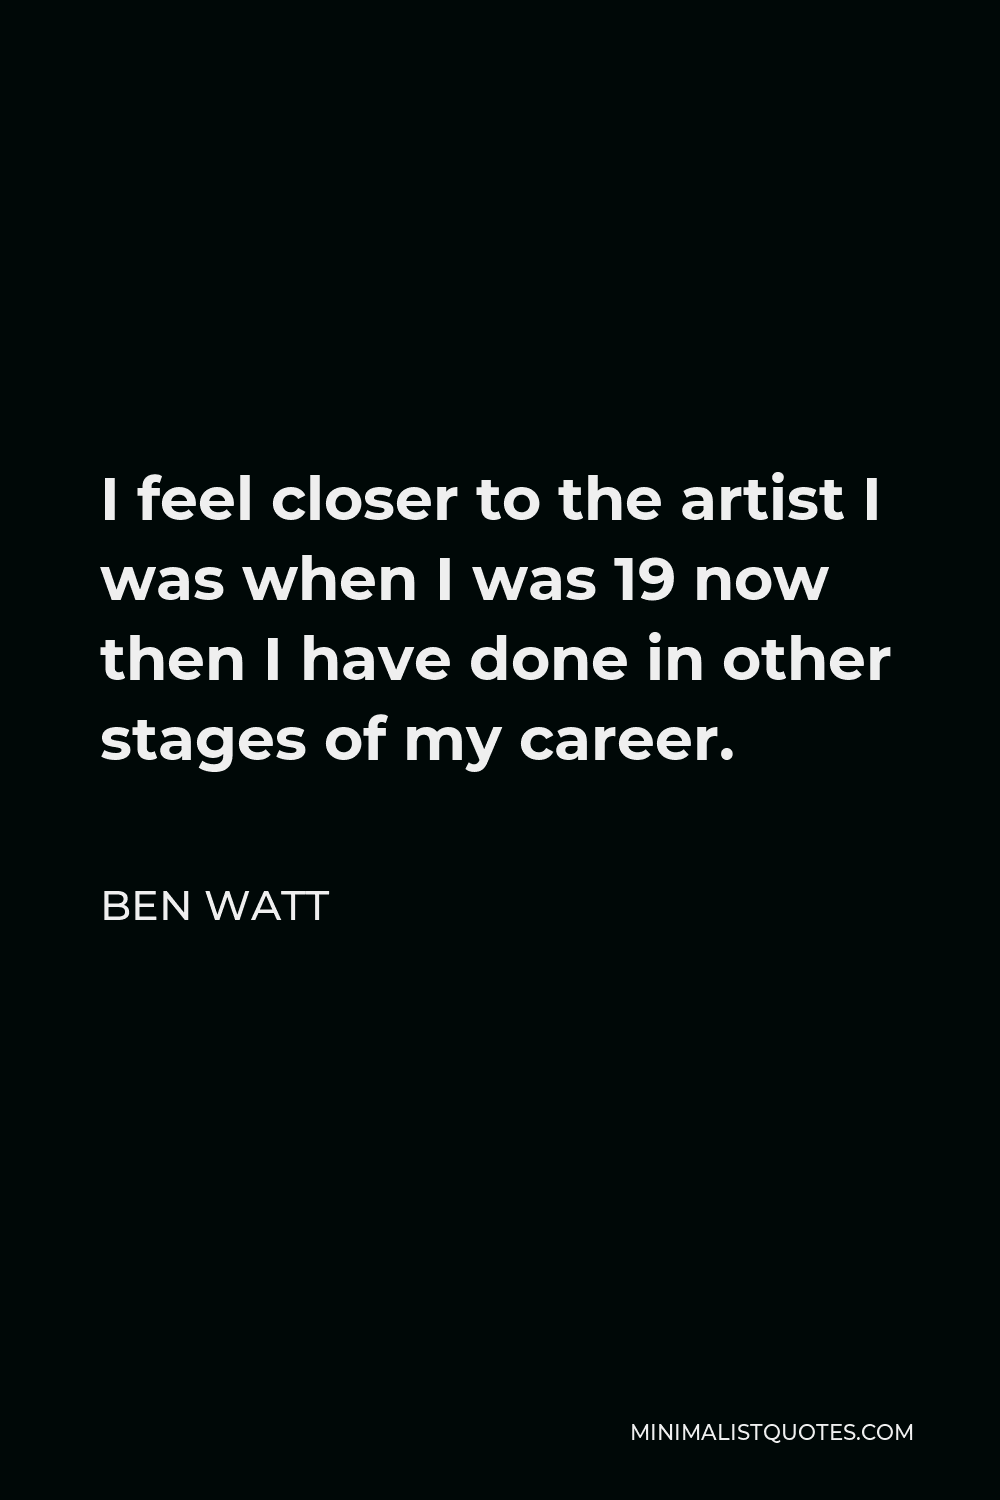 Ben Watt Quote - I feel closer to the artist I was when I was 19 now then I have done in other stages of my career.